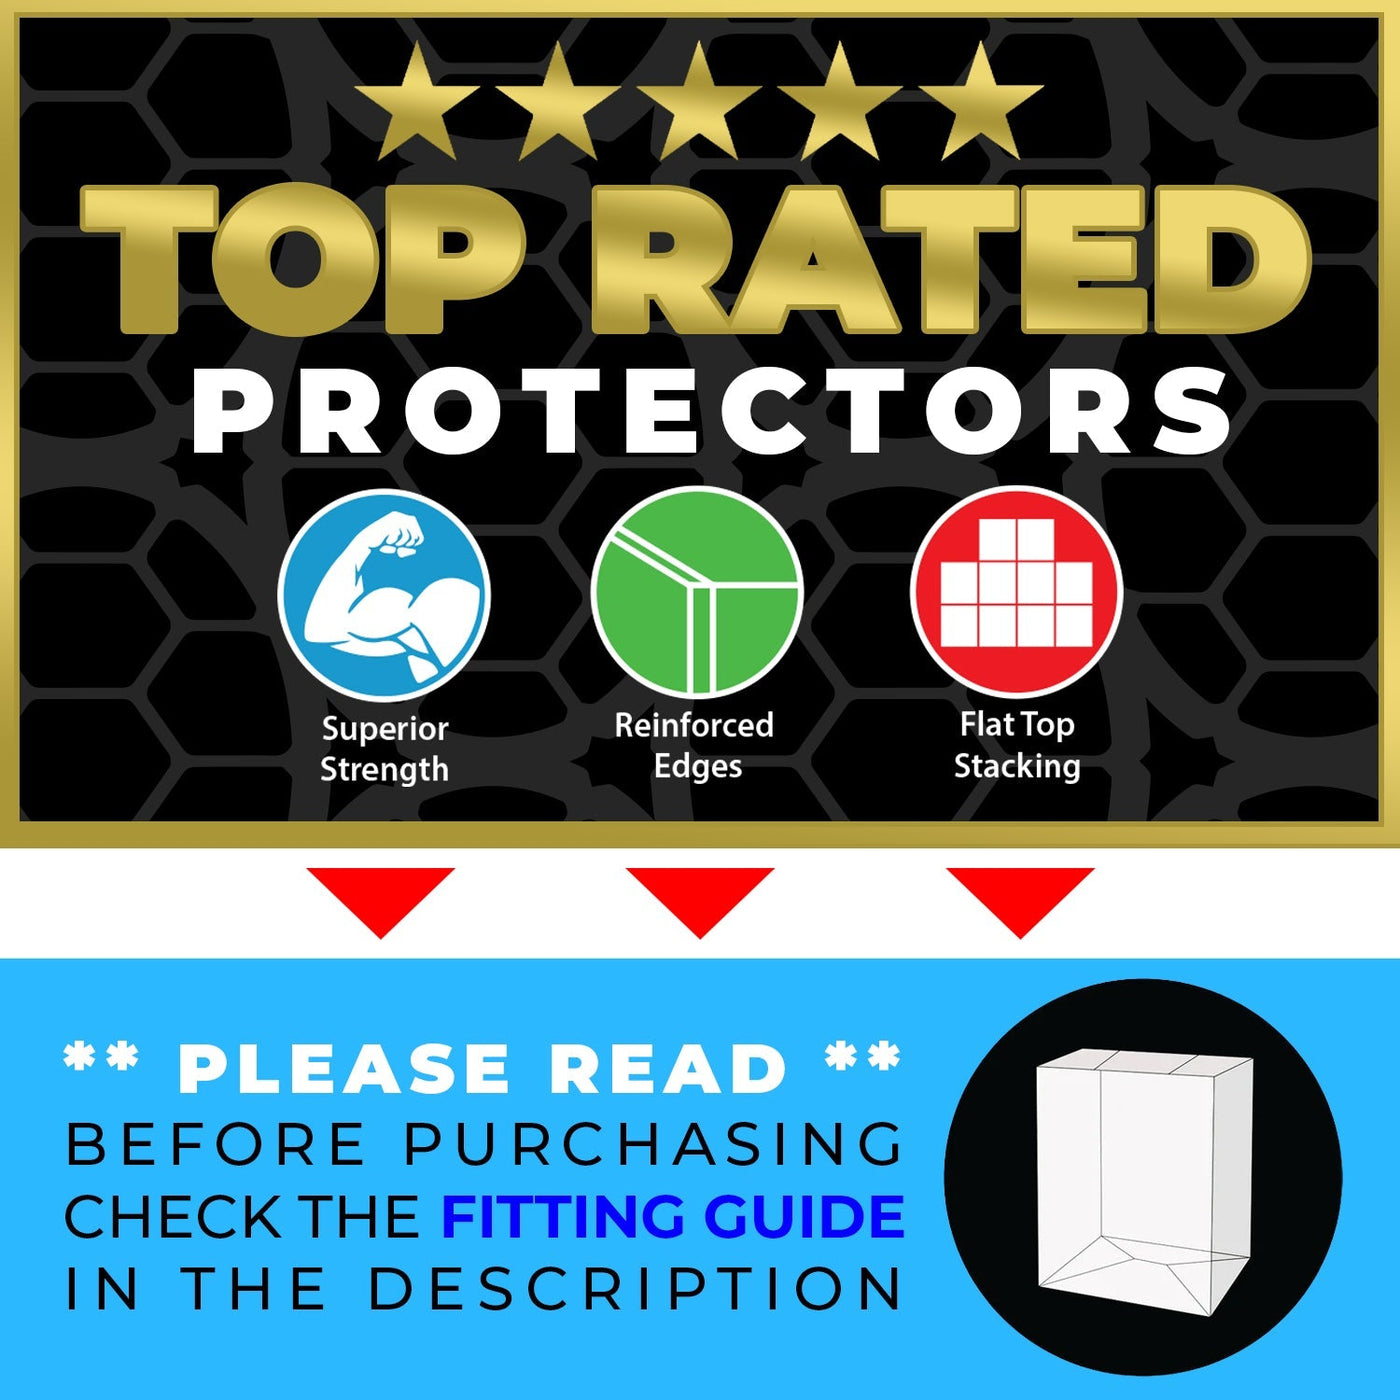 pop magazines covers slam nba best funko pop protectors thick strong uv scratch flat top stack vinyl display geek plastic shield vaulted eco armor fits collect protect display case kollector protector